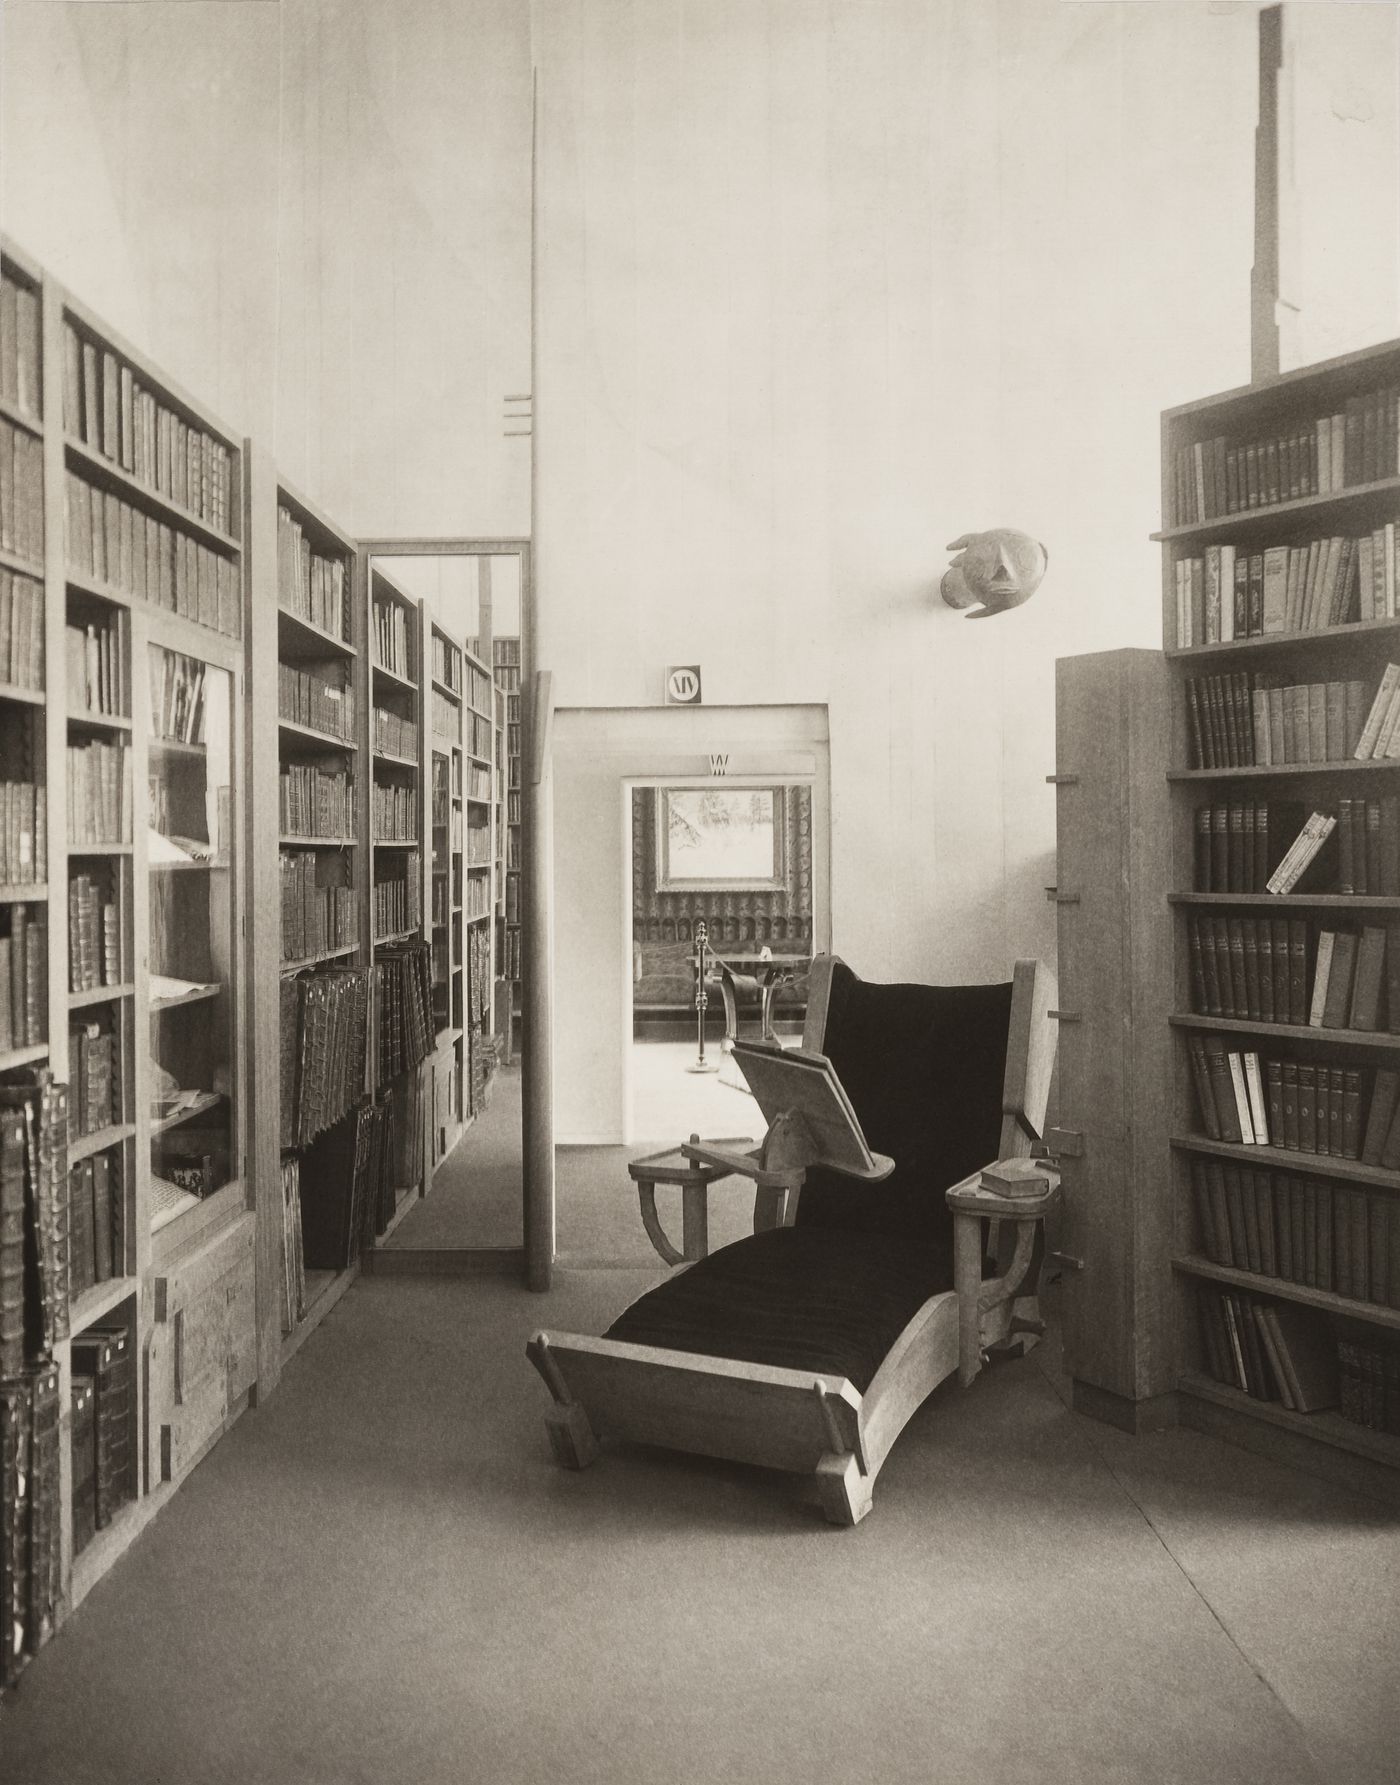 Interior view of library, with chaise lounge equipped with reading stand